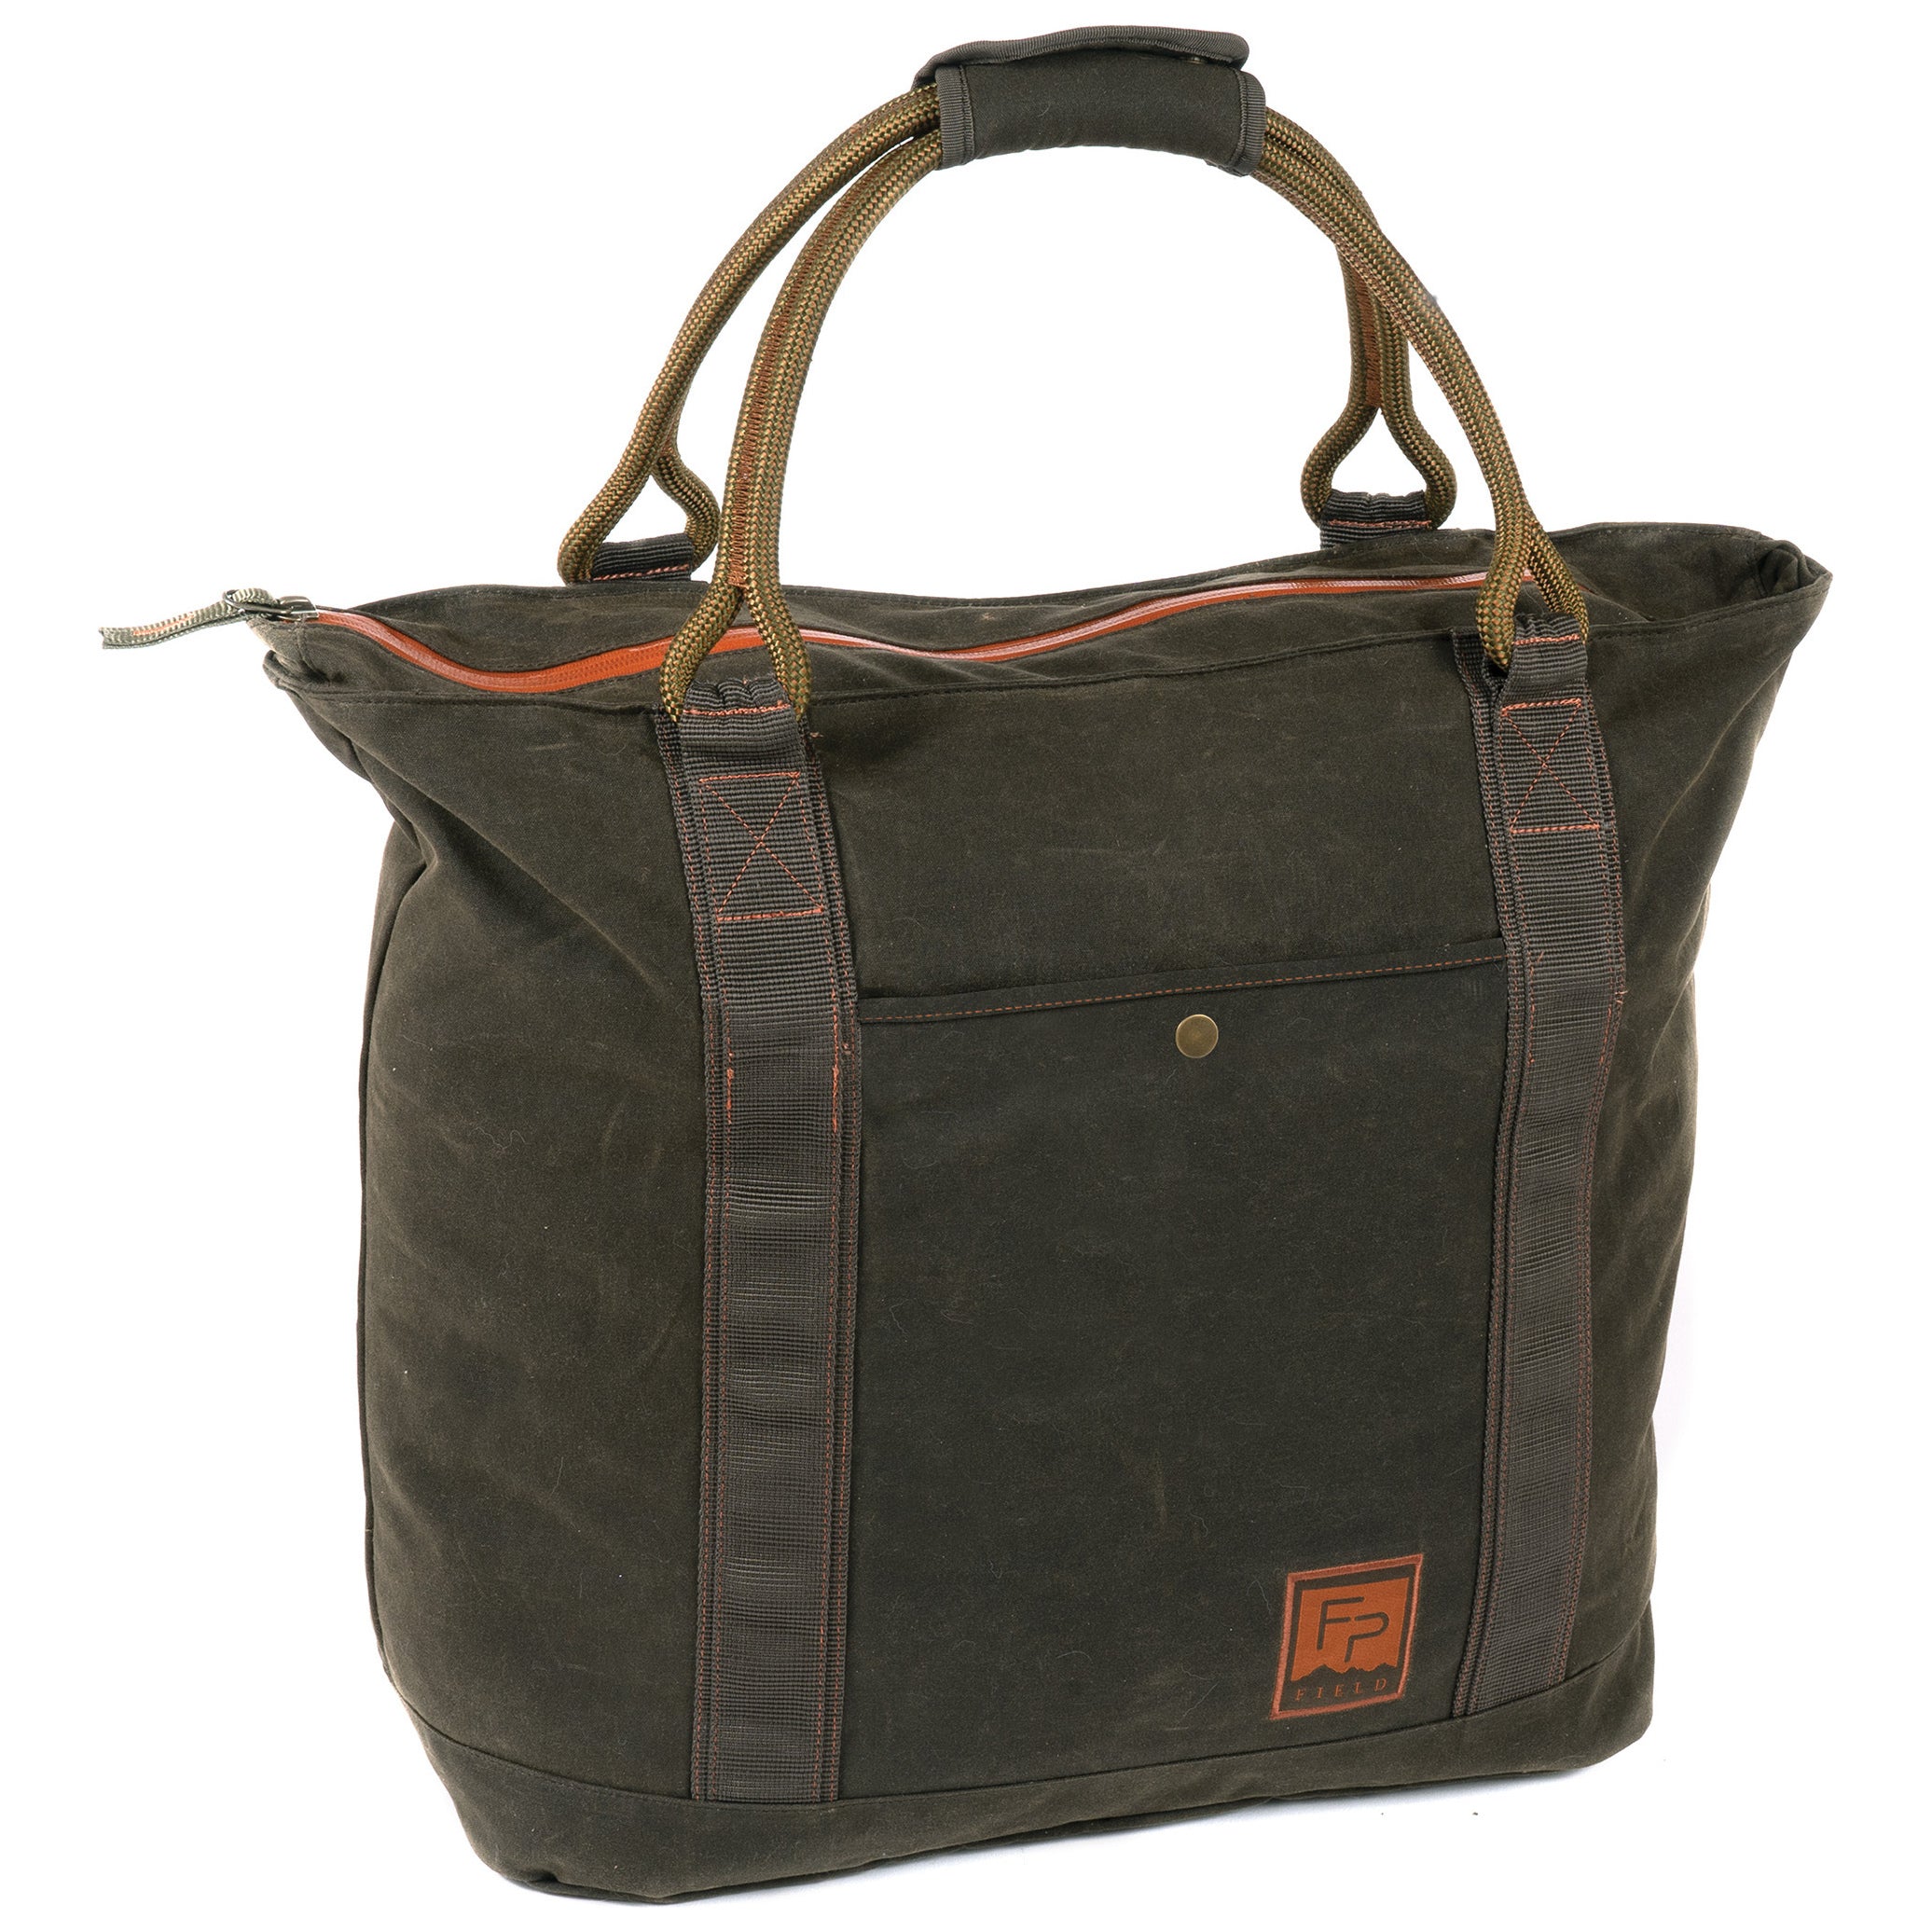 Fishpond Horse Thief Tote Peat Moss Image 01